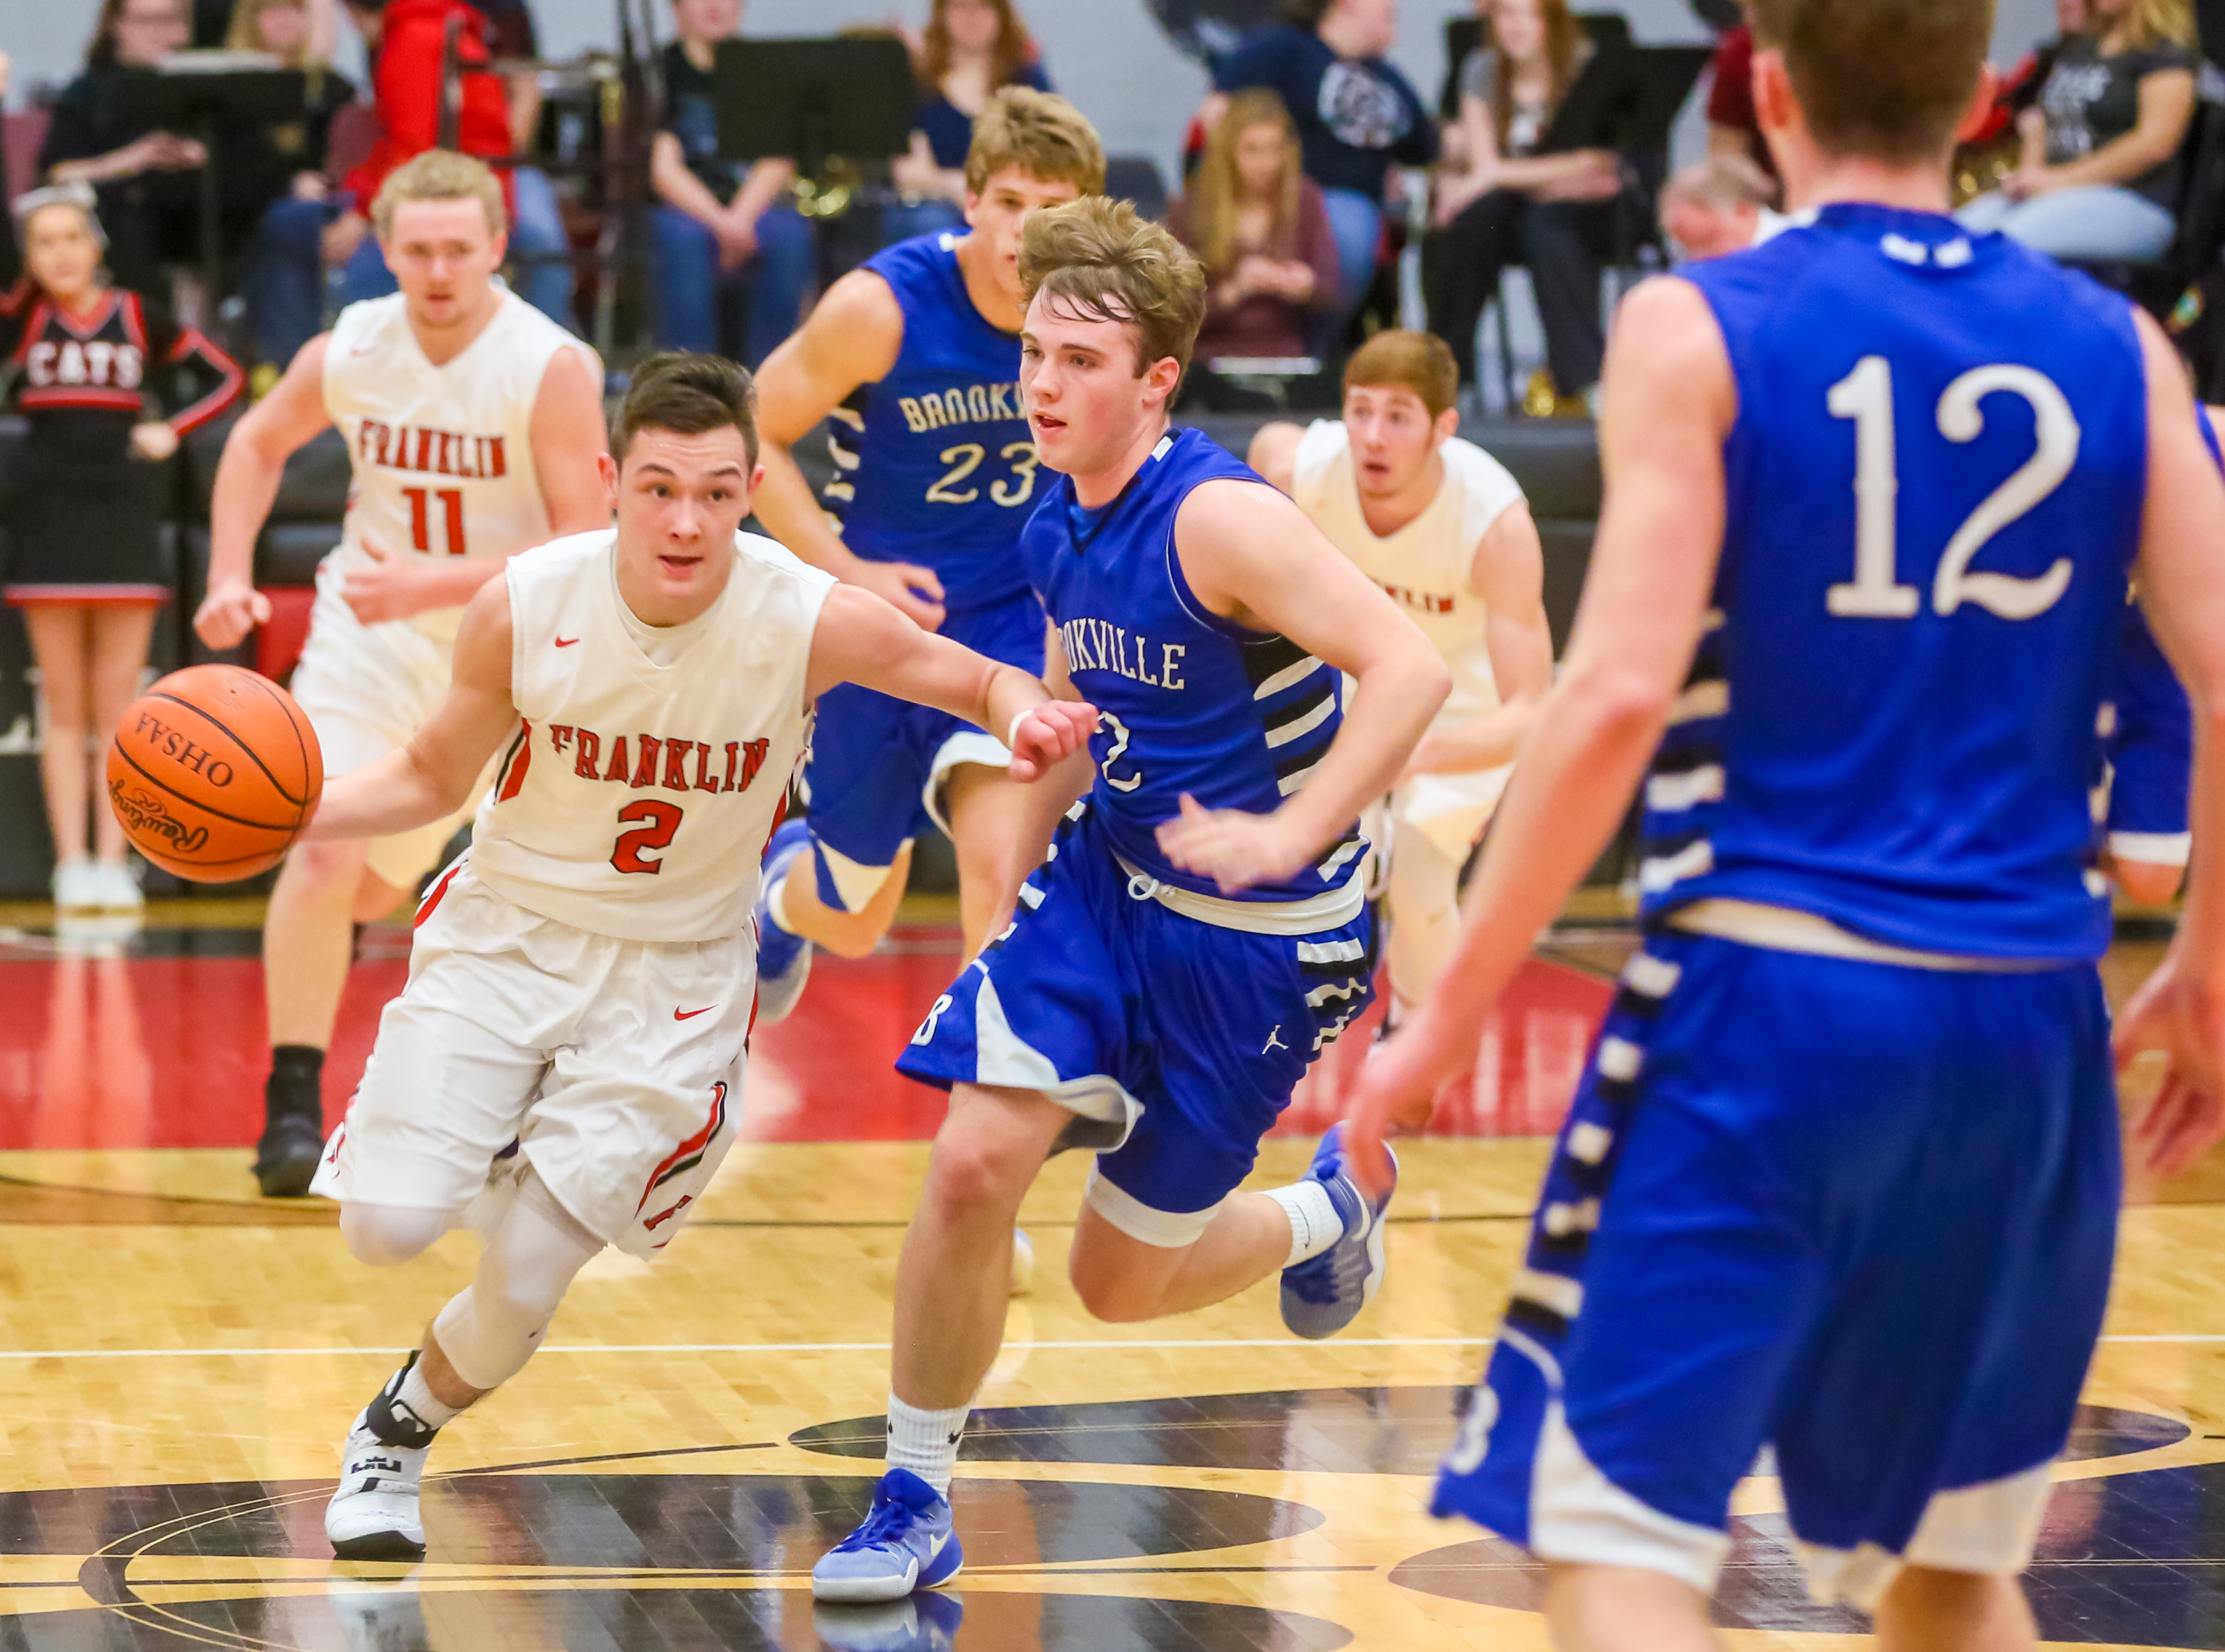 Boys Basketball: Franklin moves to 6-0 with win over Bellbrook